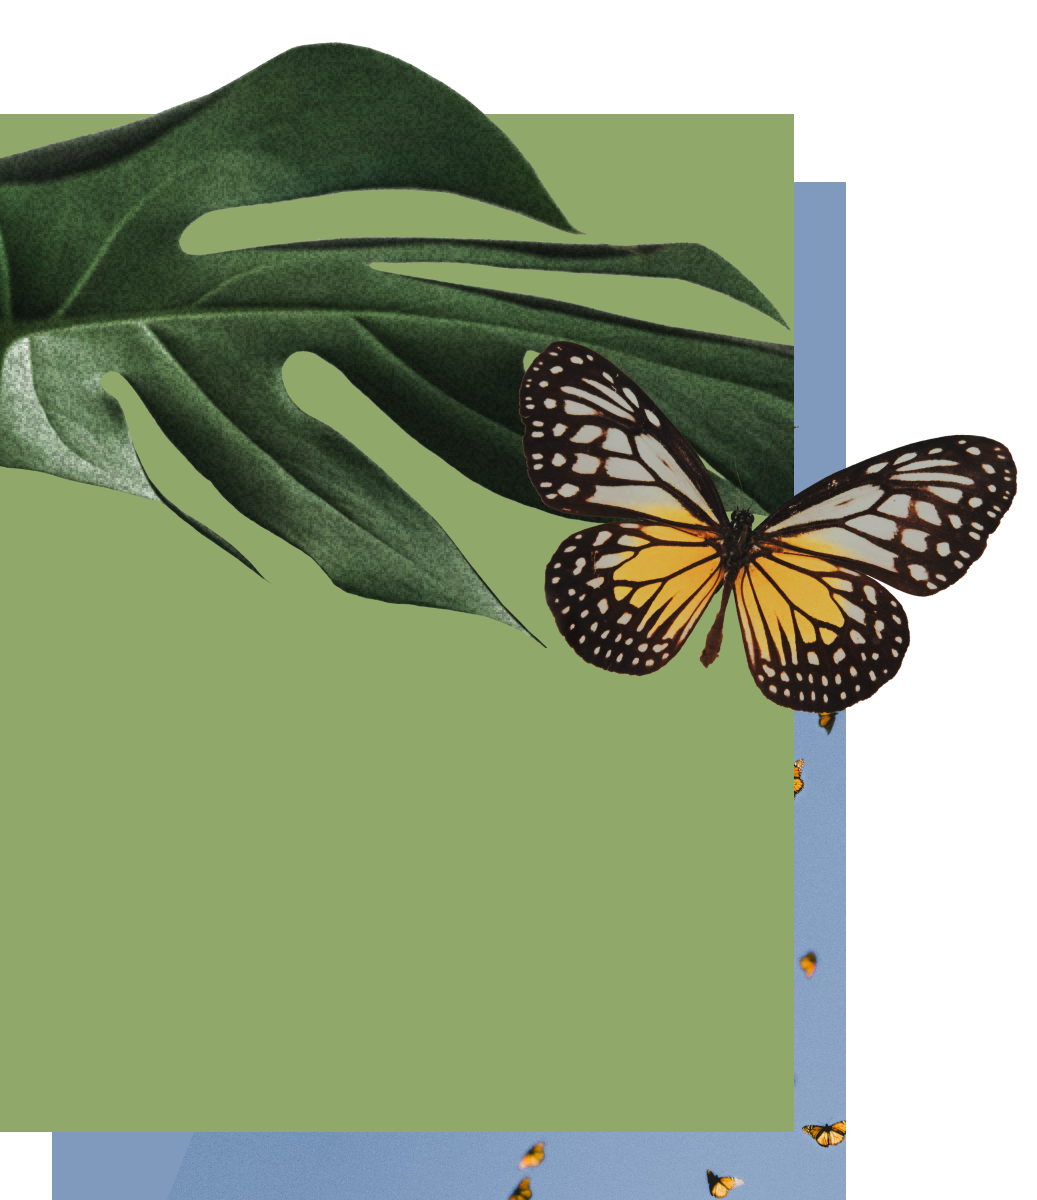 Cover image for this story, which displays a monstera leaf and a butterfly.